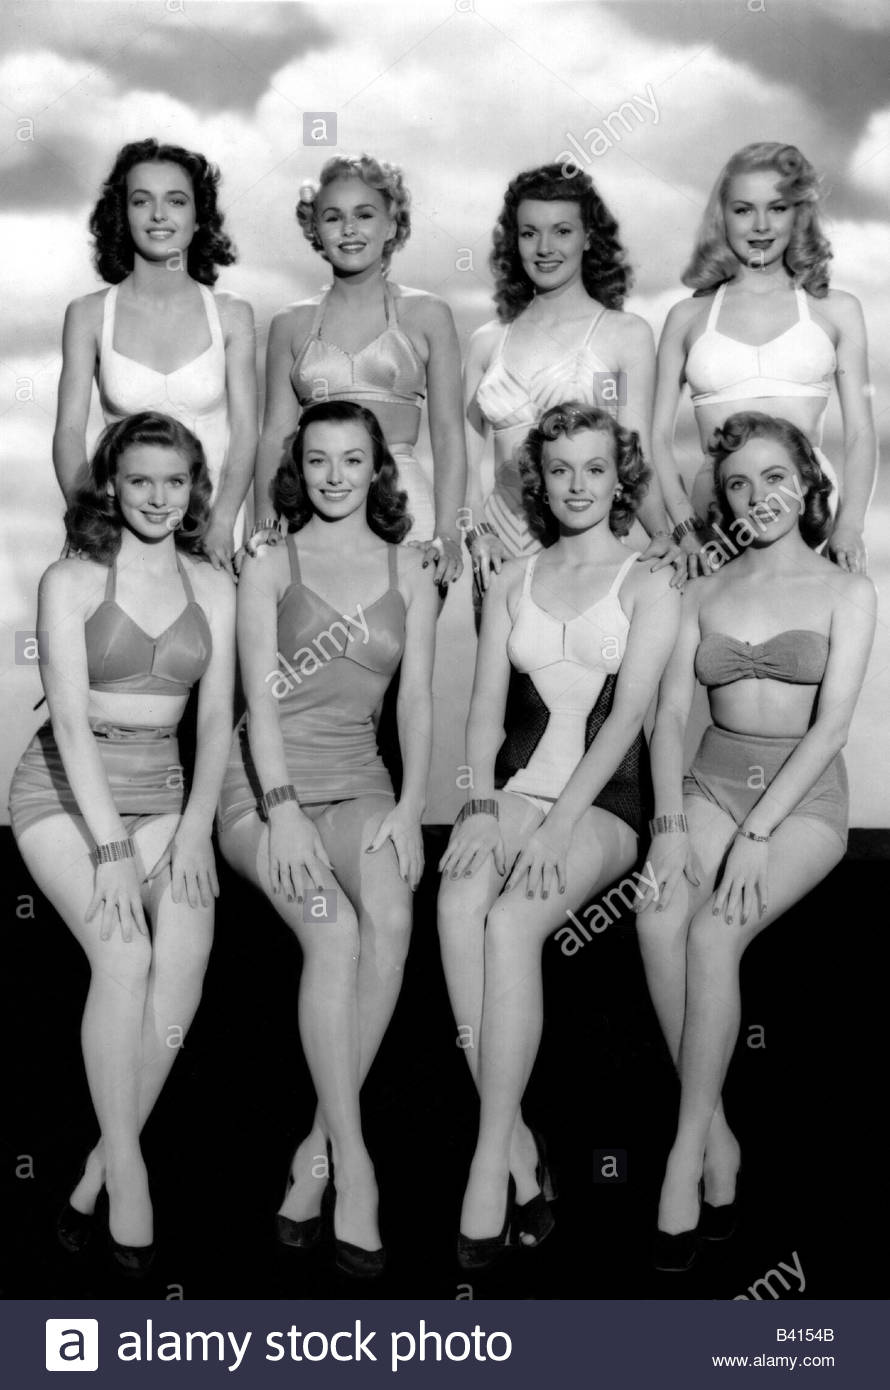 1950 style bathing suits> OFF-54% & Free Shipping!